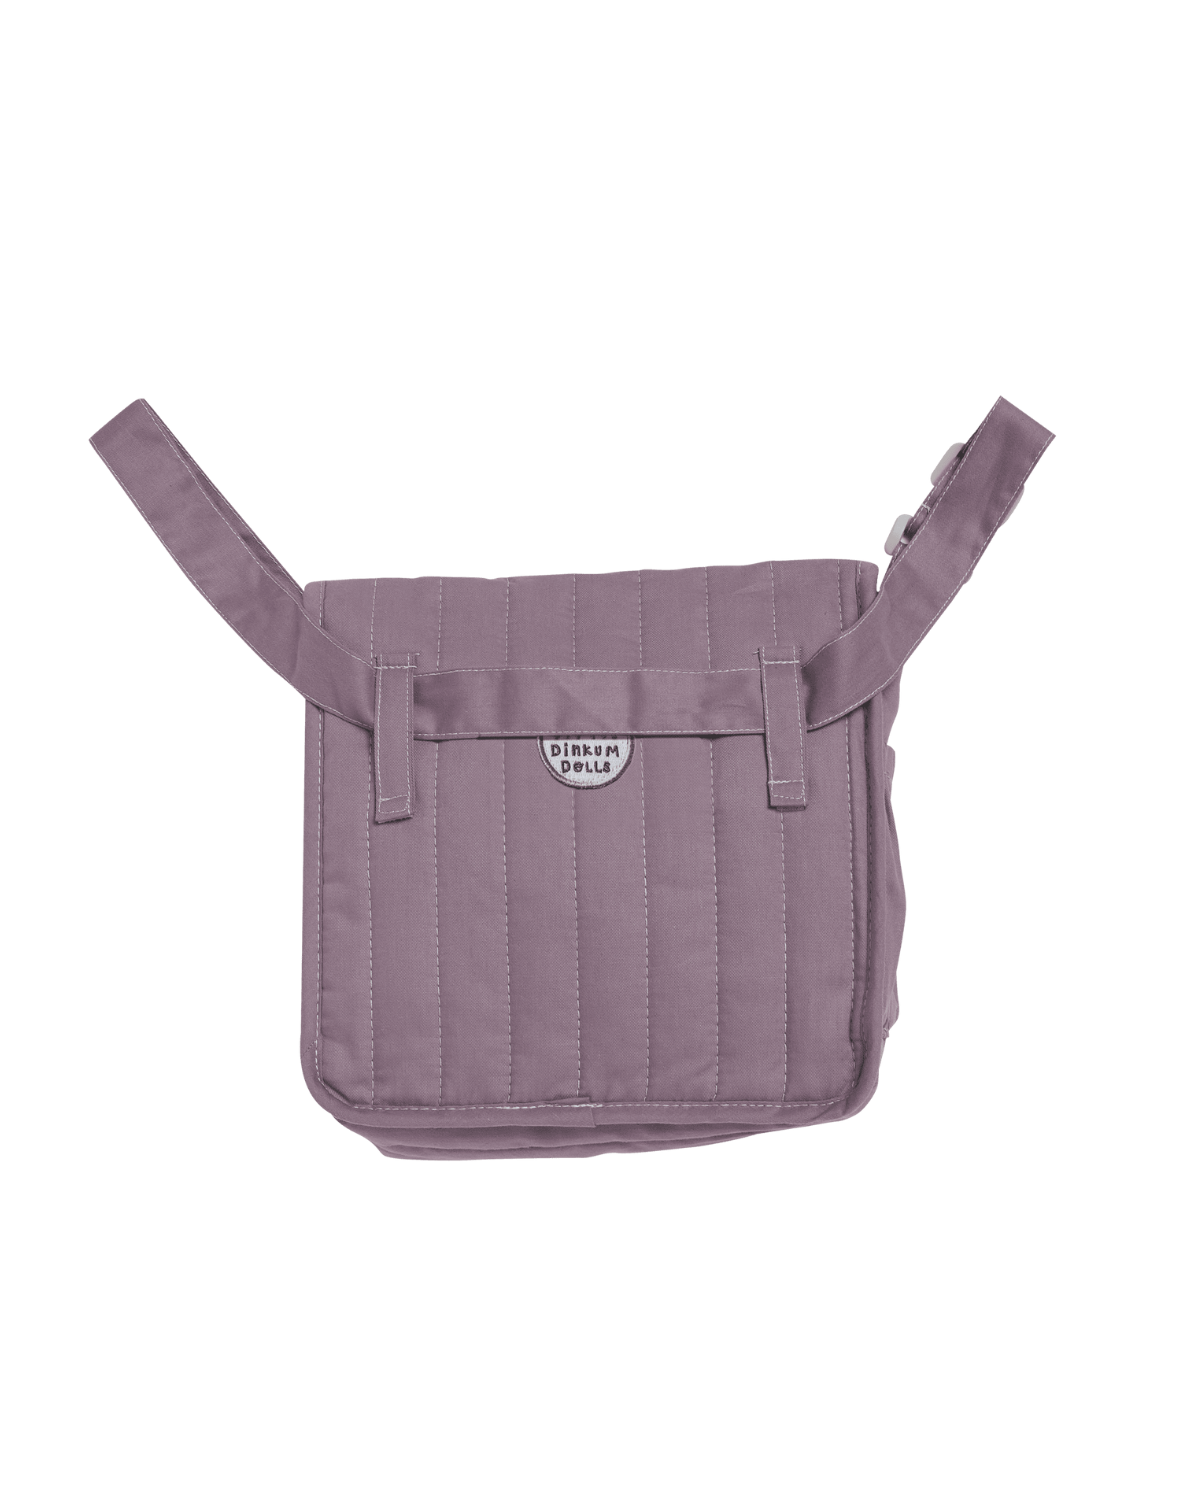 Lavender Finish Carrie Convertible Changing Set